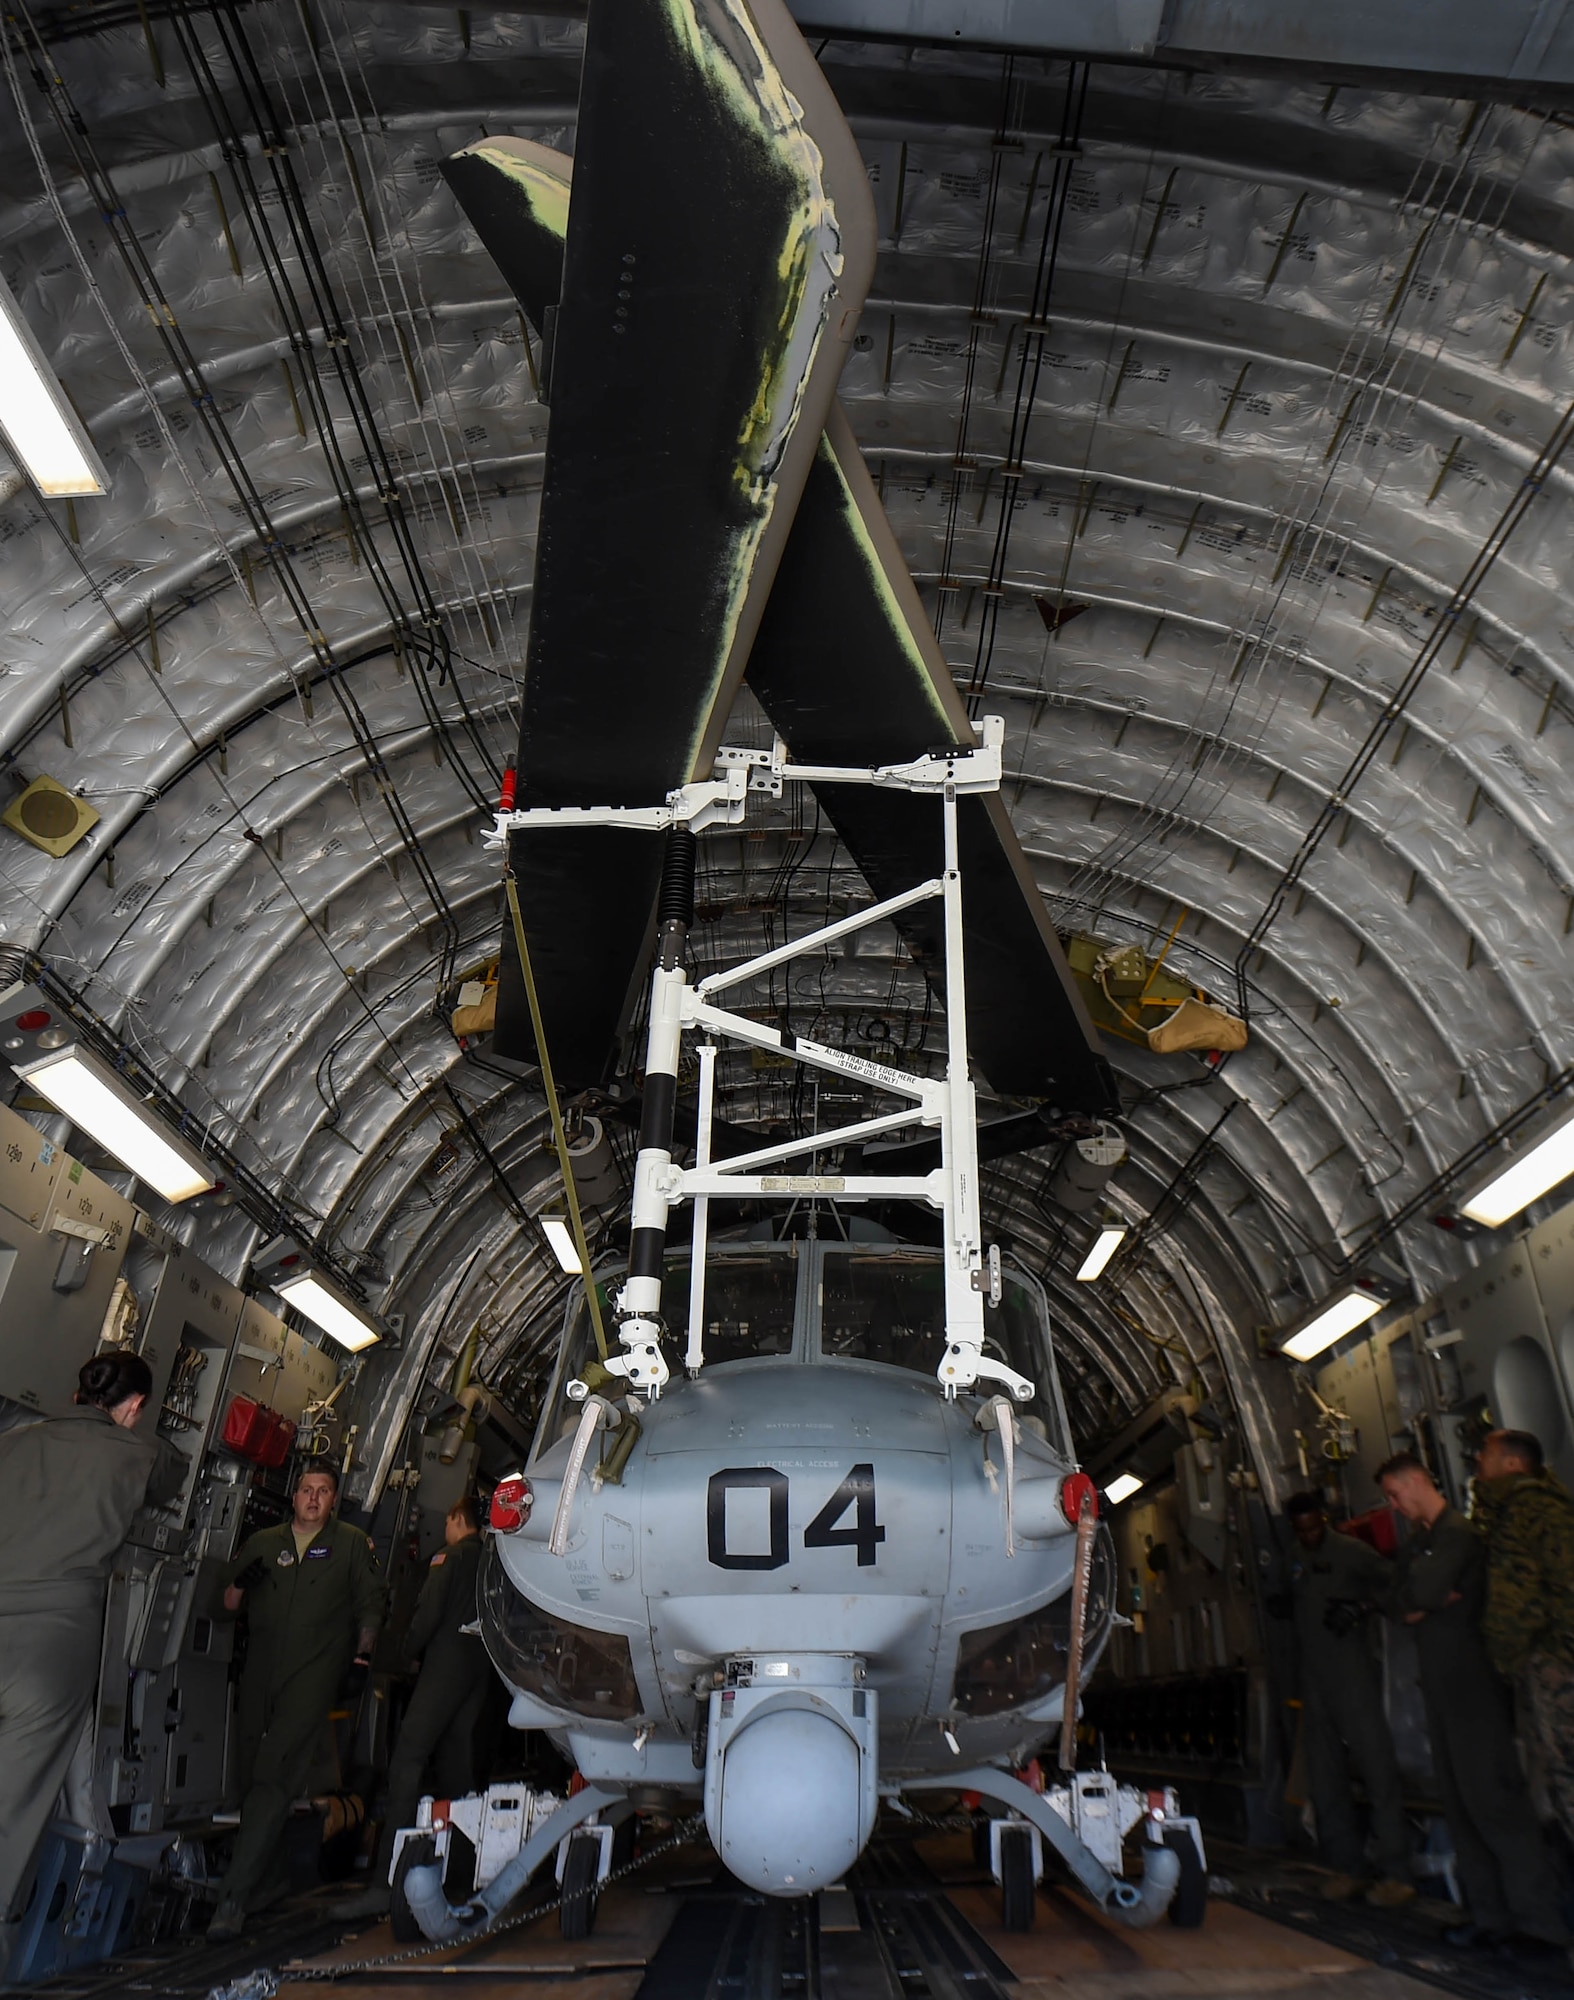 A U.S. Marine Corps UH-1Y Venom sits inside a U.S. Air Force C-17 Globemaster III at Václav Havel Airport Prague, Czech Republic, Sept. 10, 2018. Airmen from the 4th Airlift Squadron transported the helicopter to the Czech Republic so both aircraft could participate in the NATO Days Air Show held there. (U.S. Air Force photo by Senior Airman Tryphena Mayhugh)